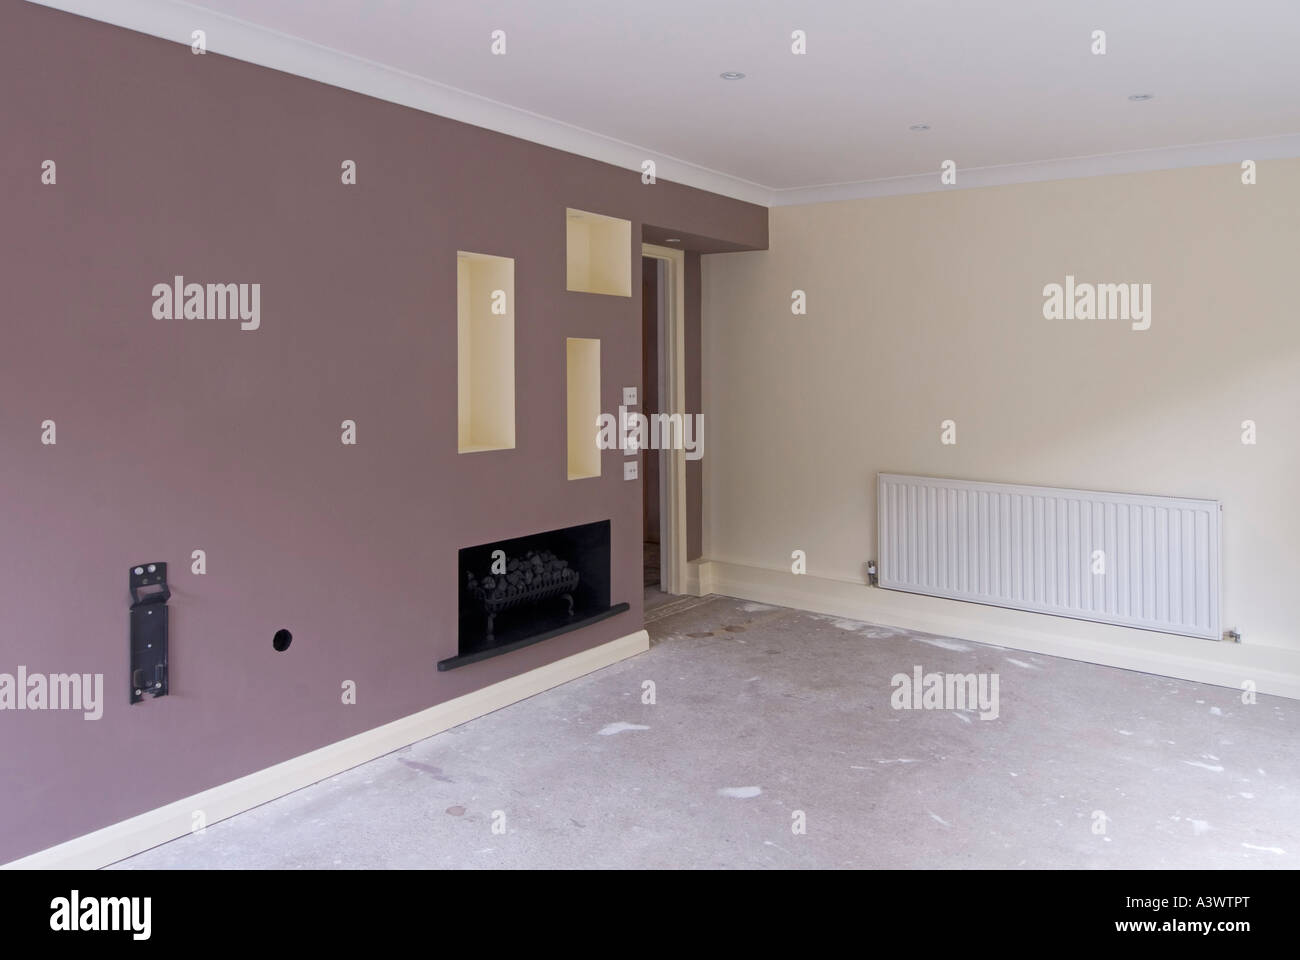 Home improvements interior makeover domestic lounge involving plaster & decorated emulsion paint recesses lighting England UK Stock Photo